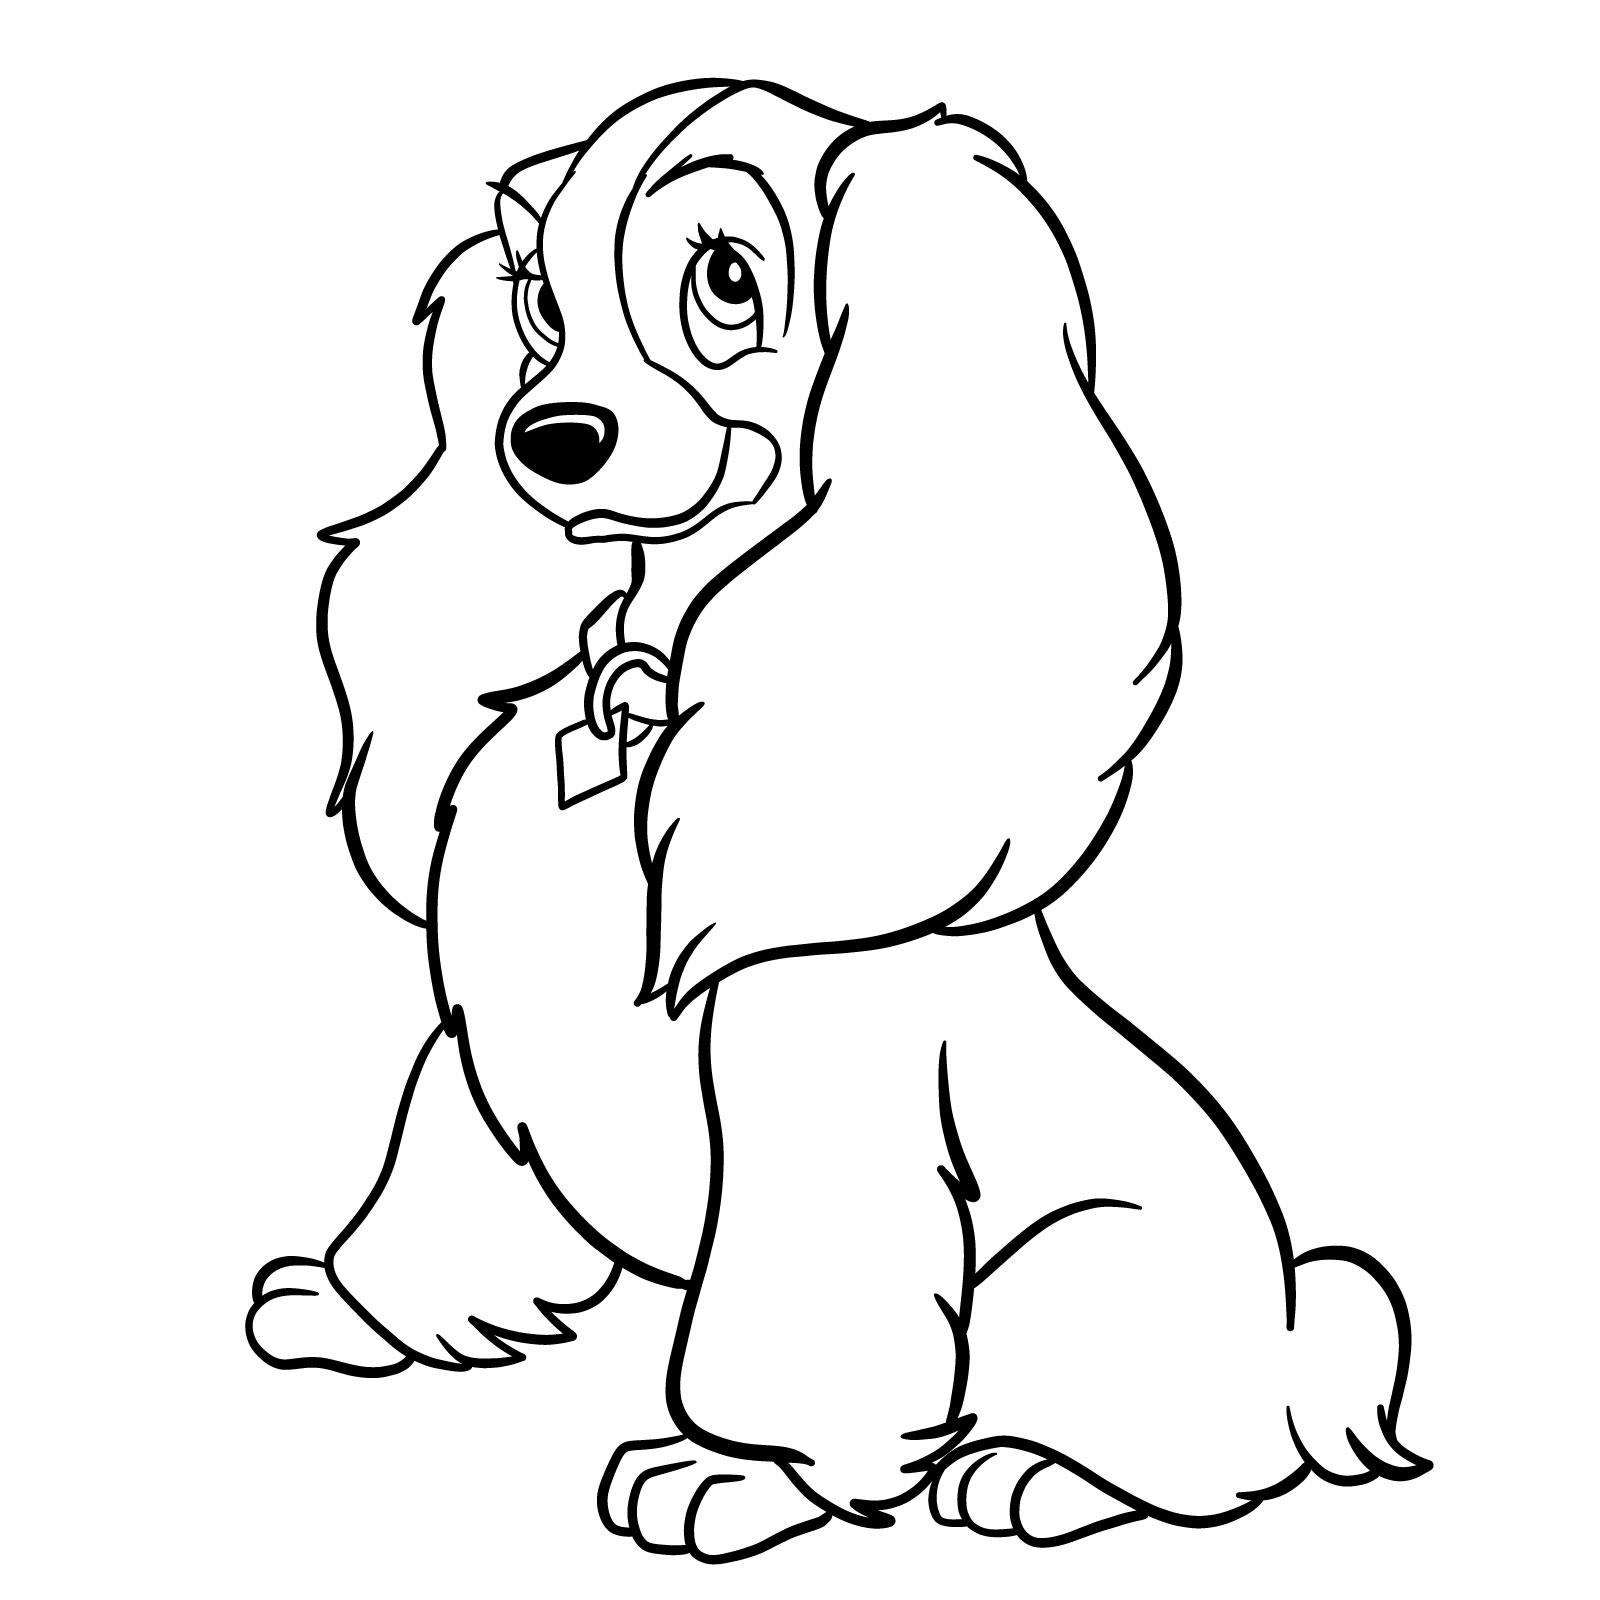 How to draw Lady (Lady and the Tramp) - coloring